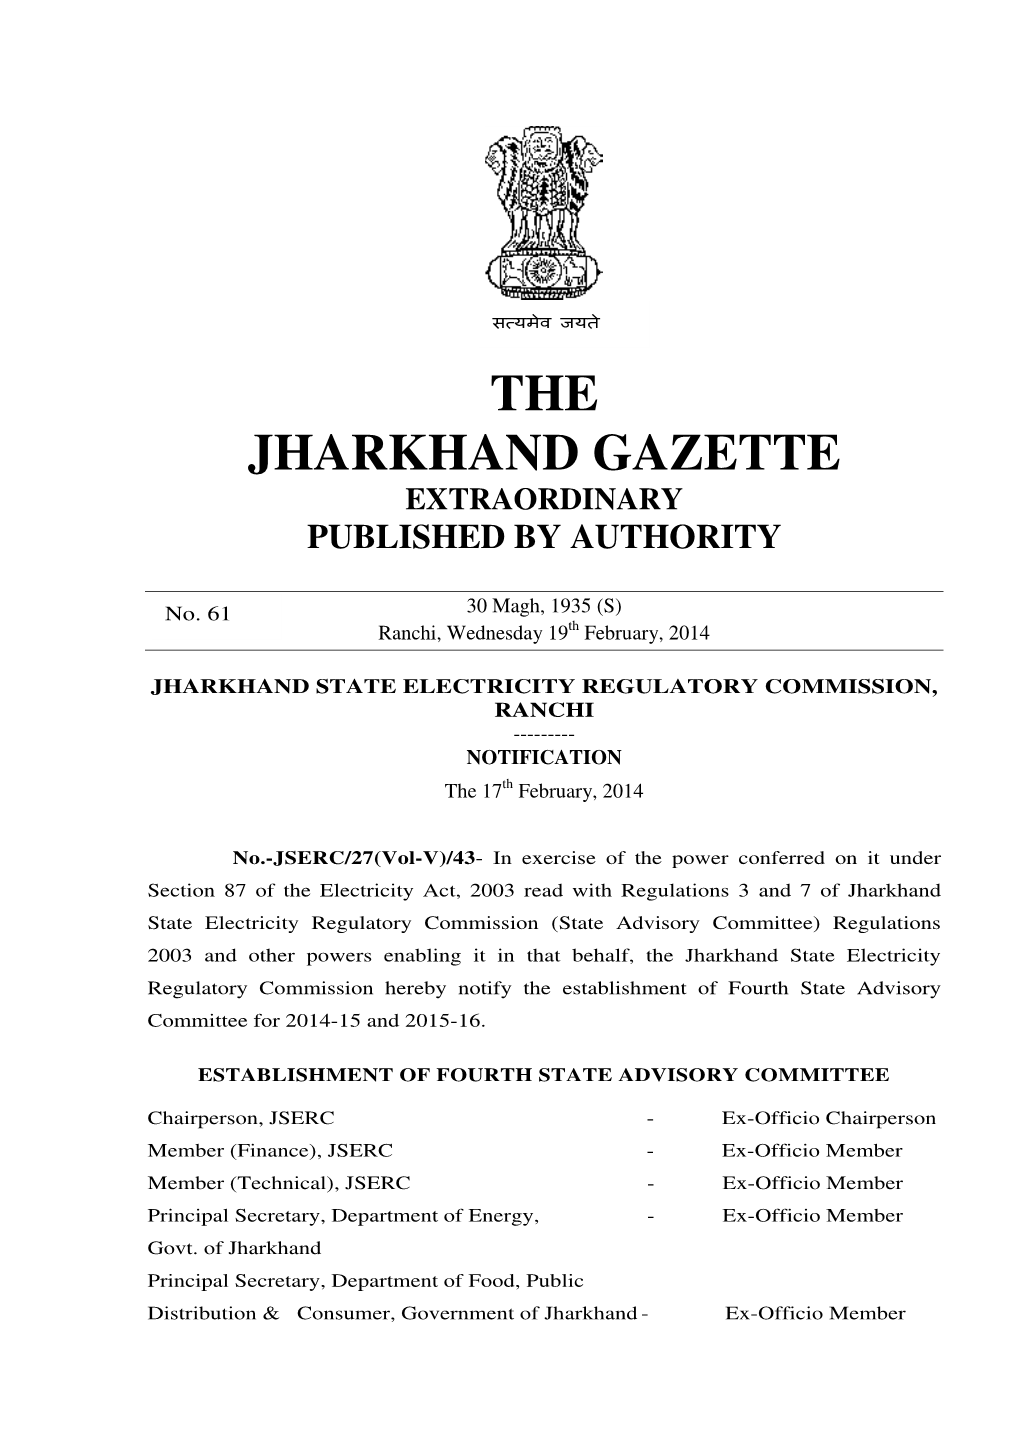 The Jharkhand Gazette Extraordinary Published by Authority